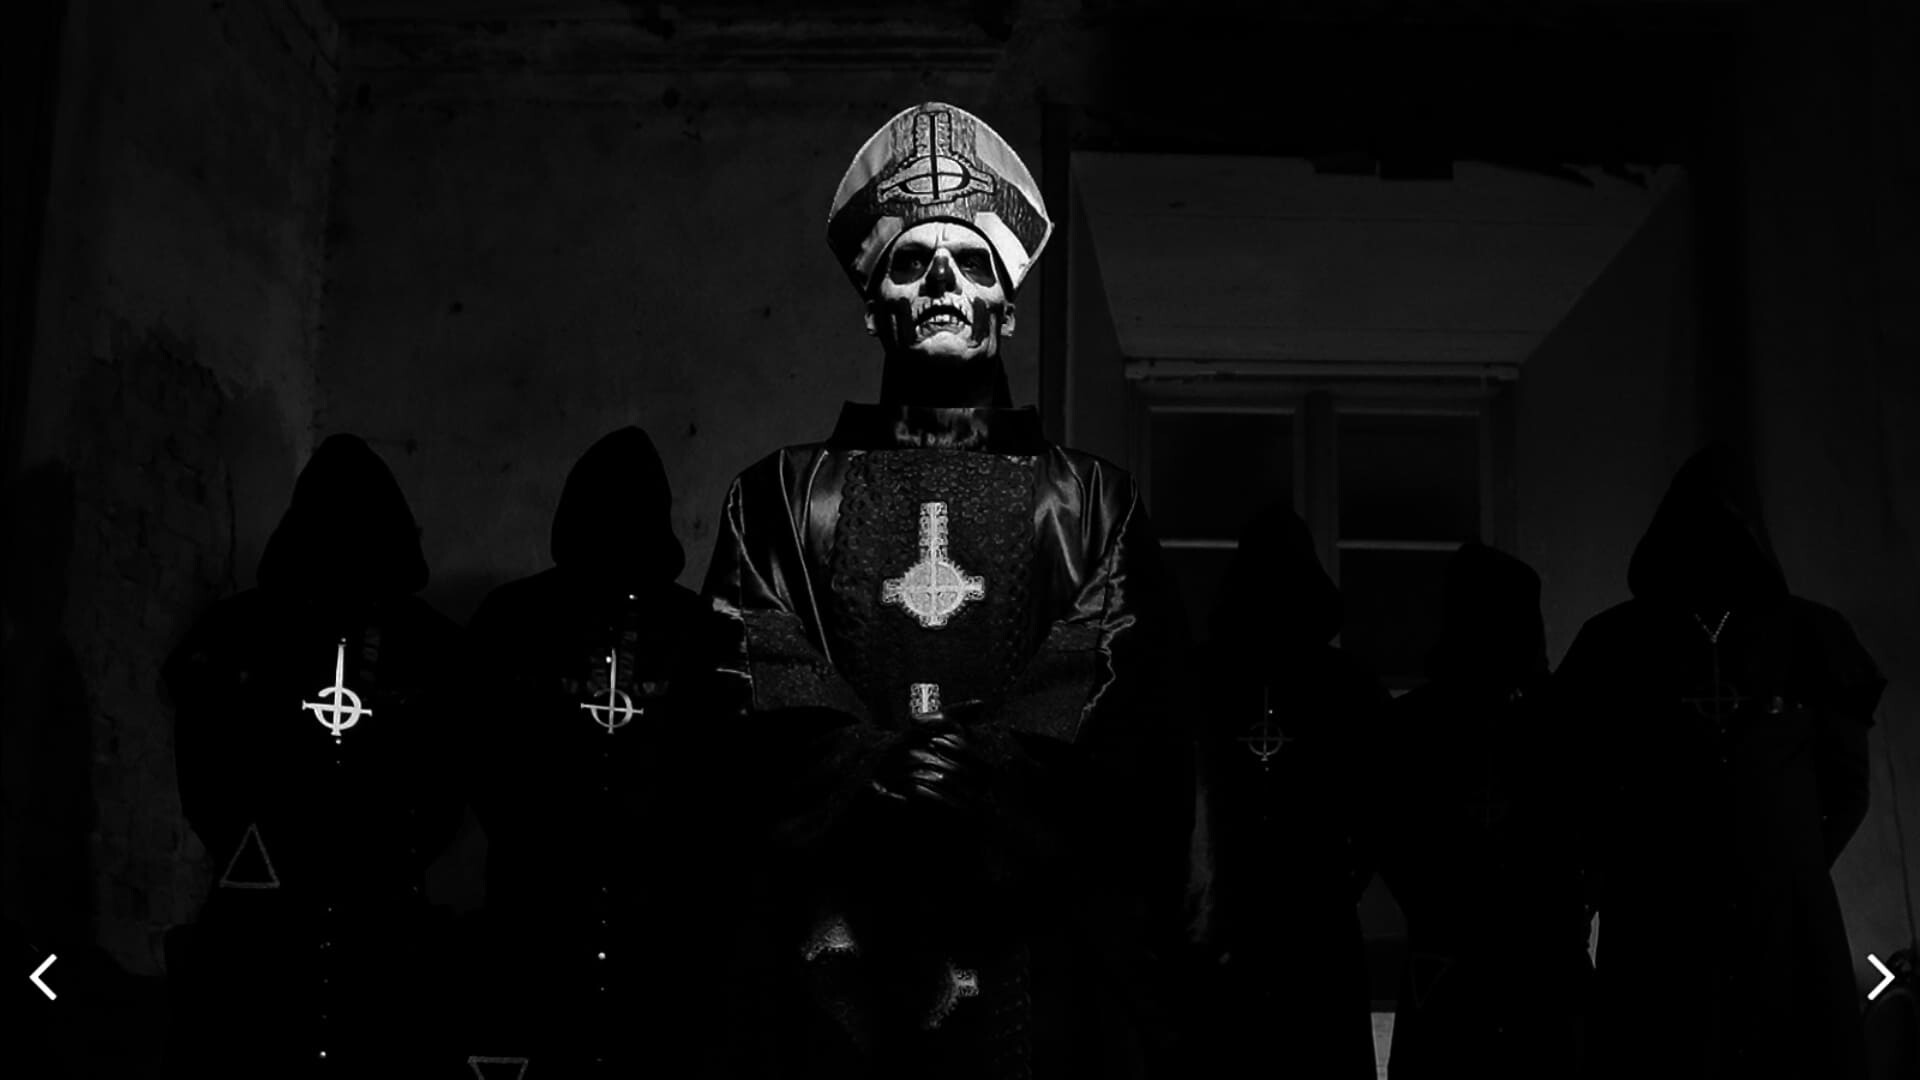 Ghost (Band): A member of the Group of Nameless Ghouls, A Ghoul Writer, Cardinal Copia. 1920x1080 Full HD Background.